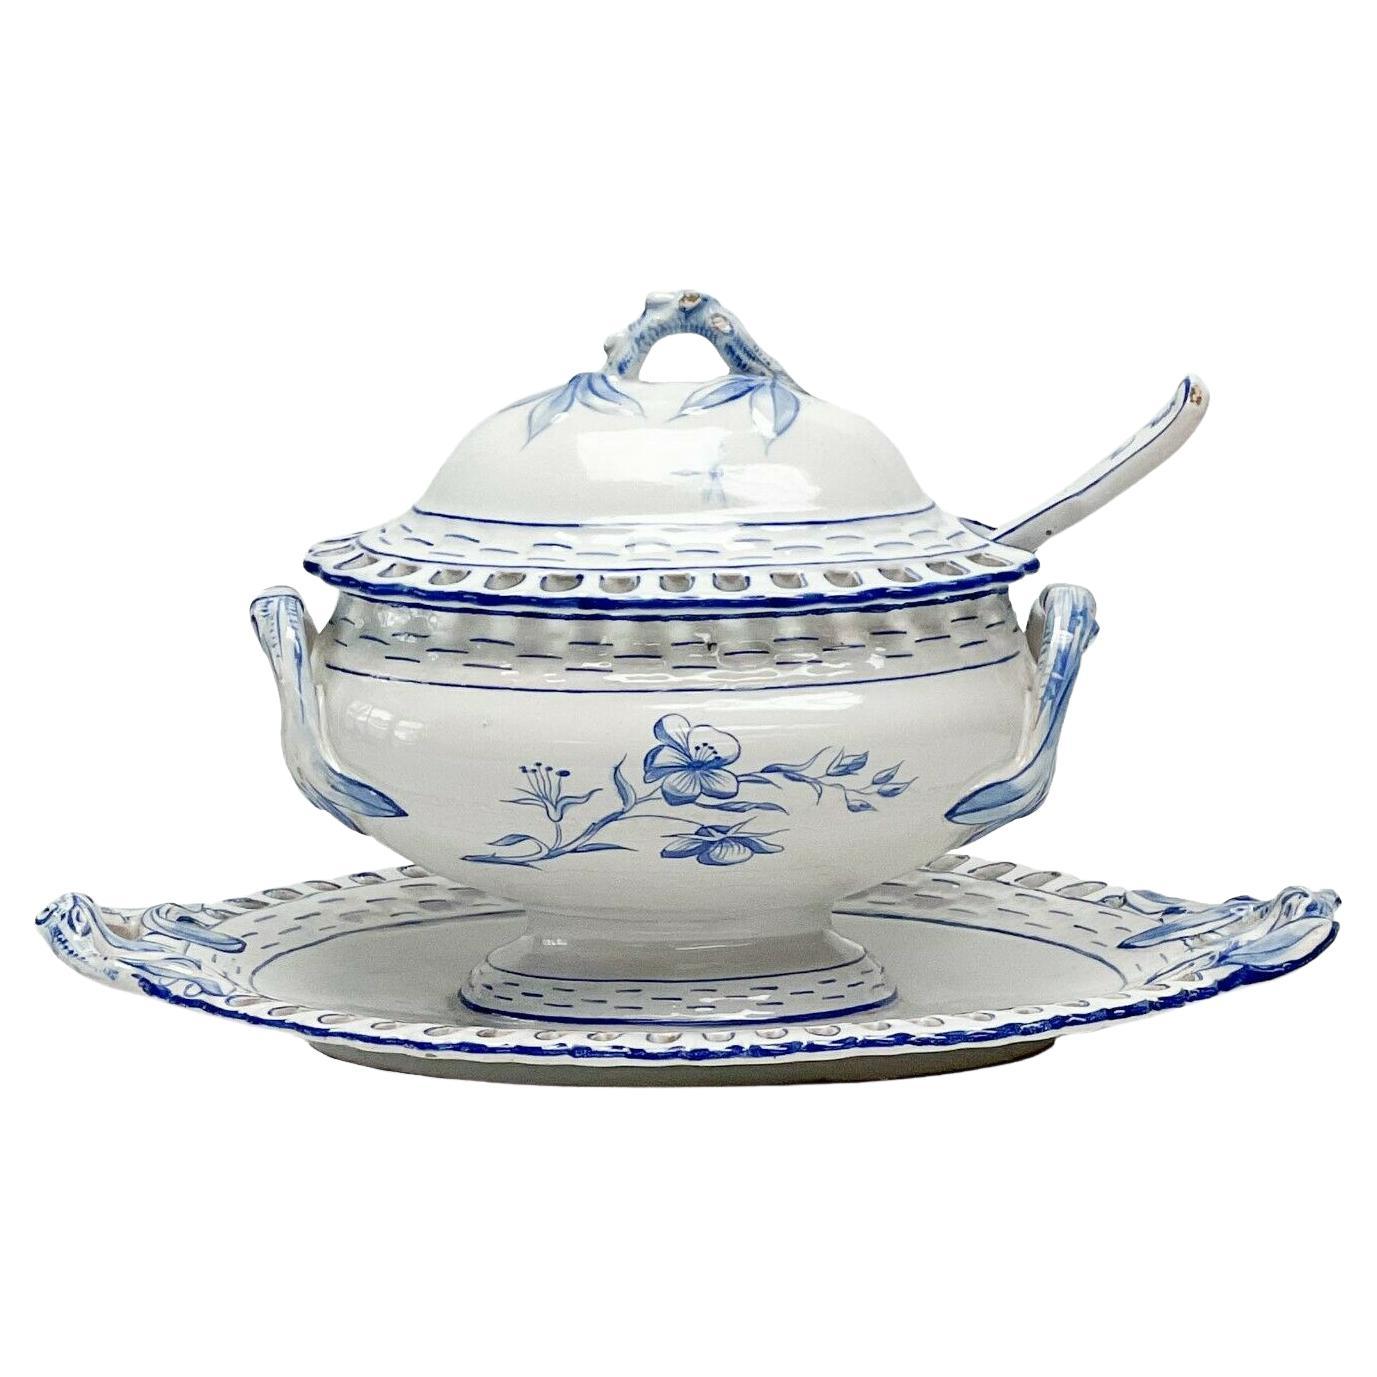 Galle Faience France Reticulated Porcelain Lidded Sauce Tureen with Assoc Spoon For Sale